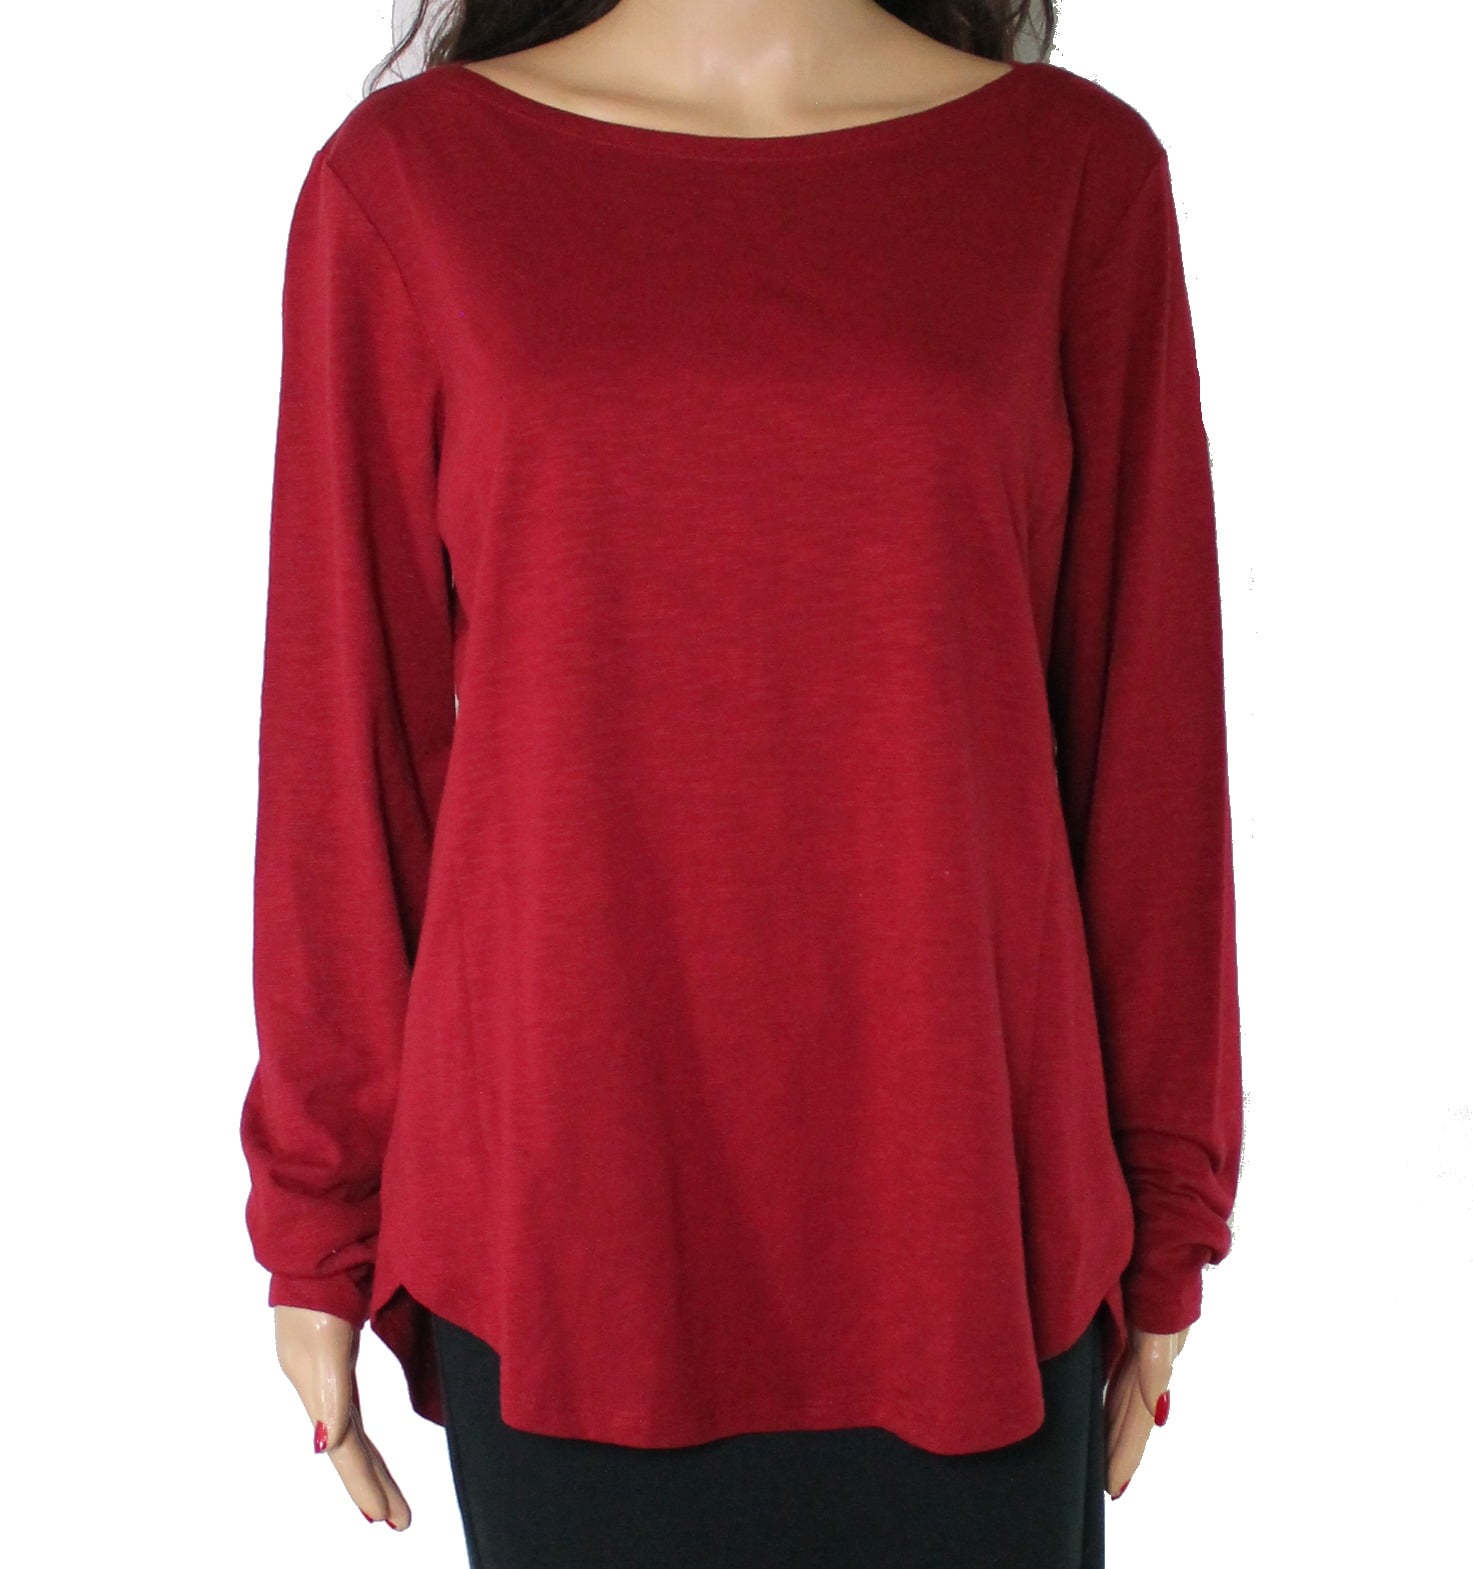 Royal Robbins Tops & Blouses - Women's Top Burgundy Large Knit Boat ...